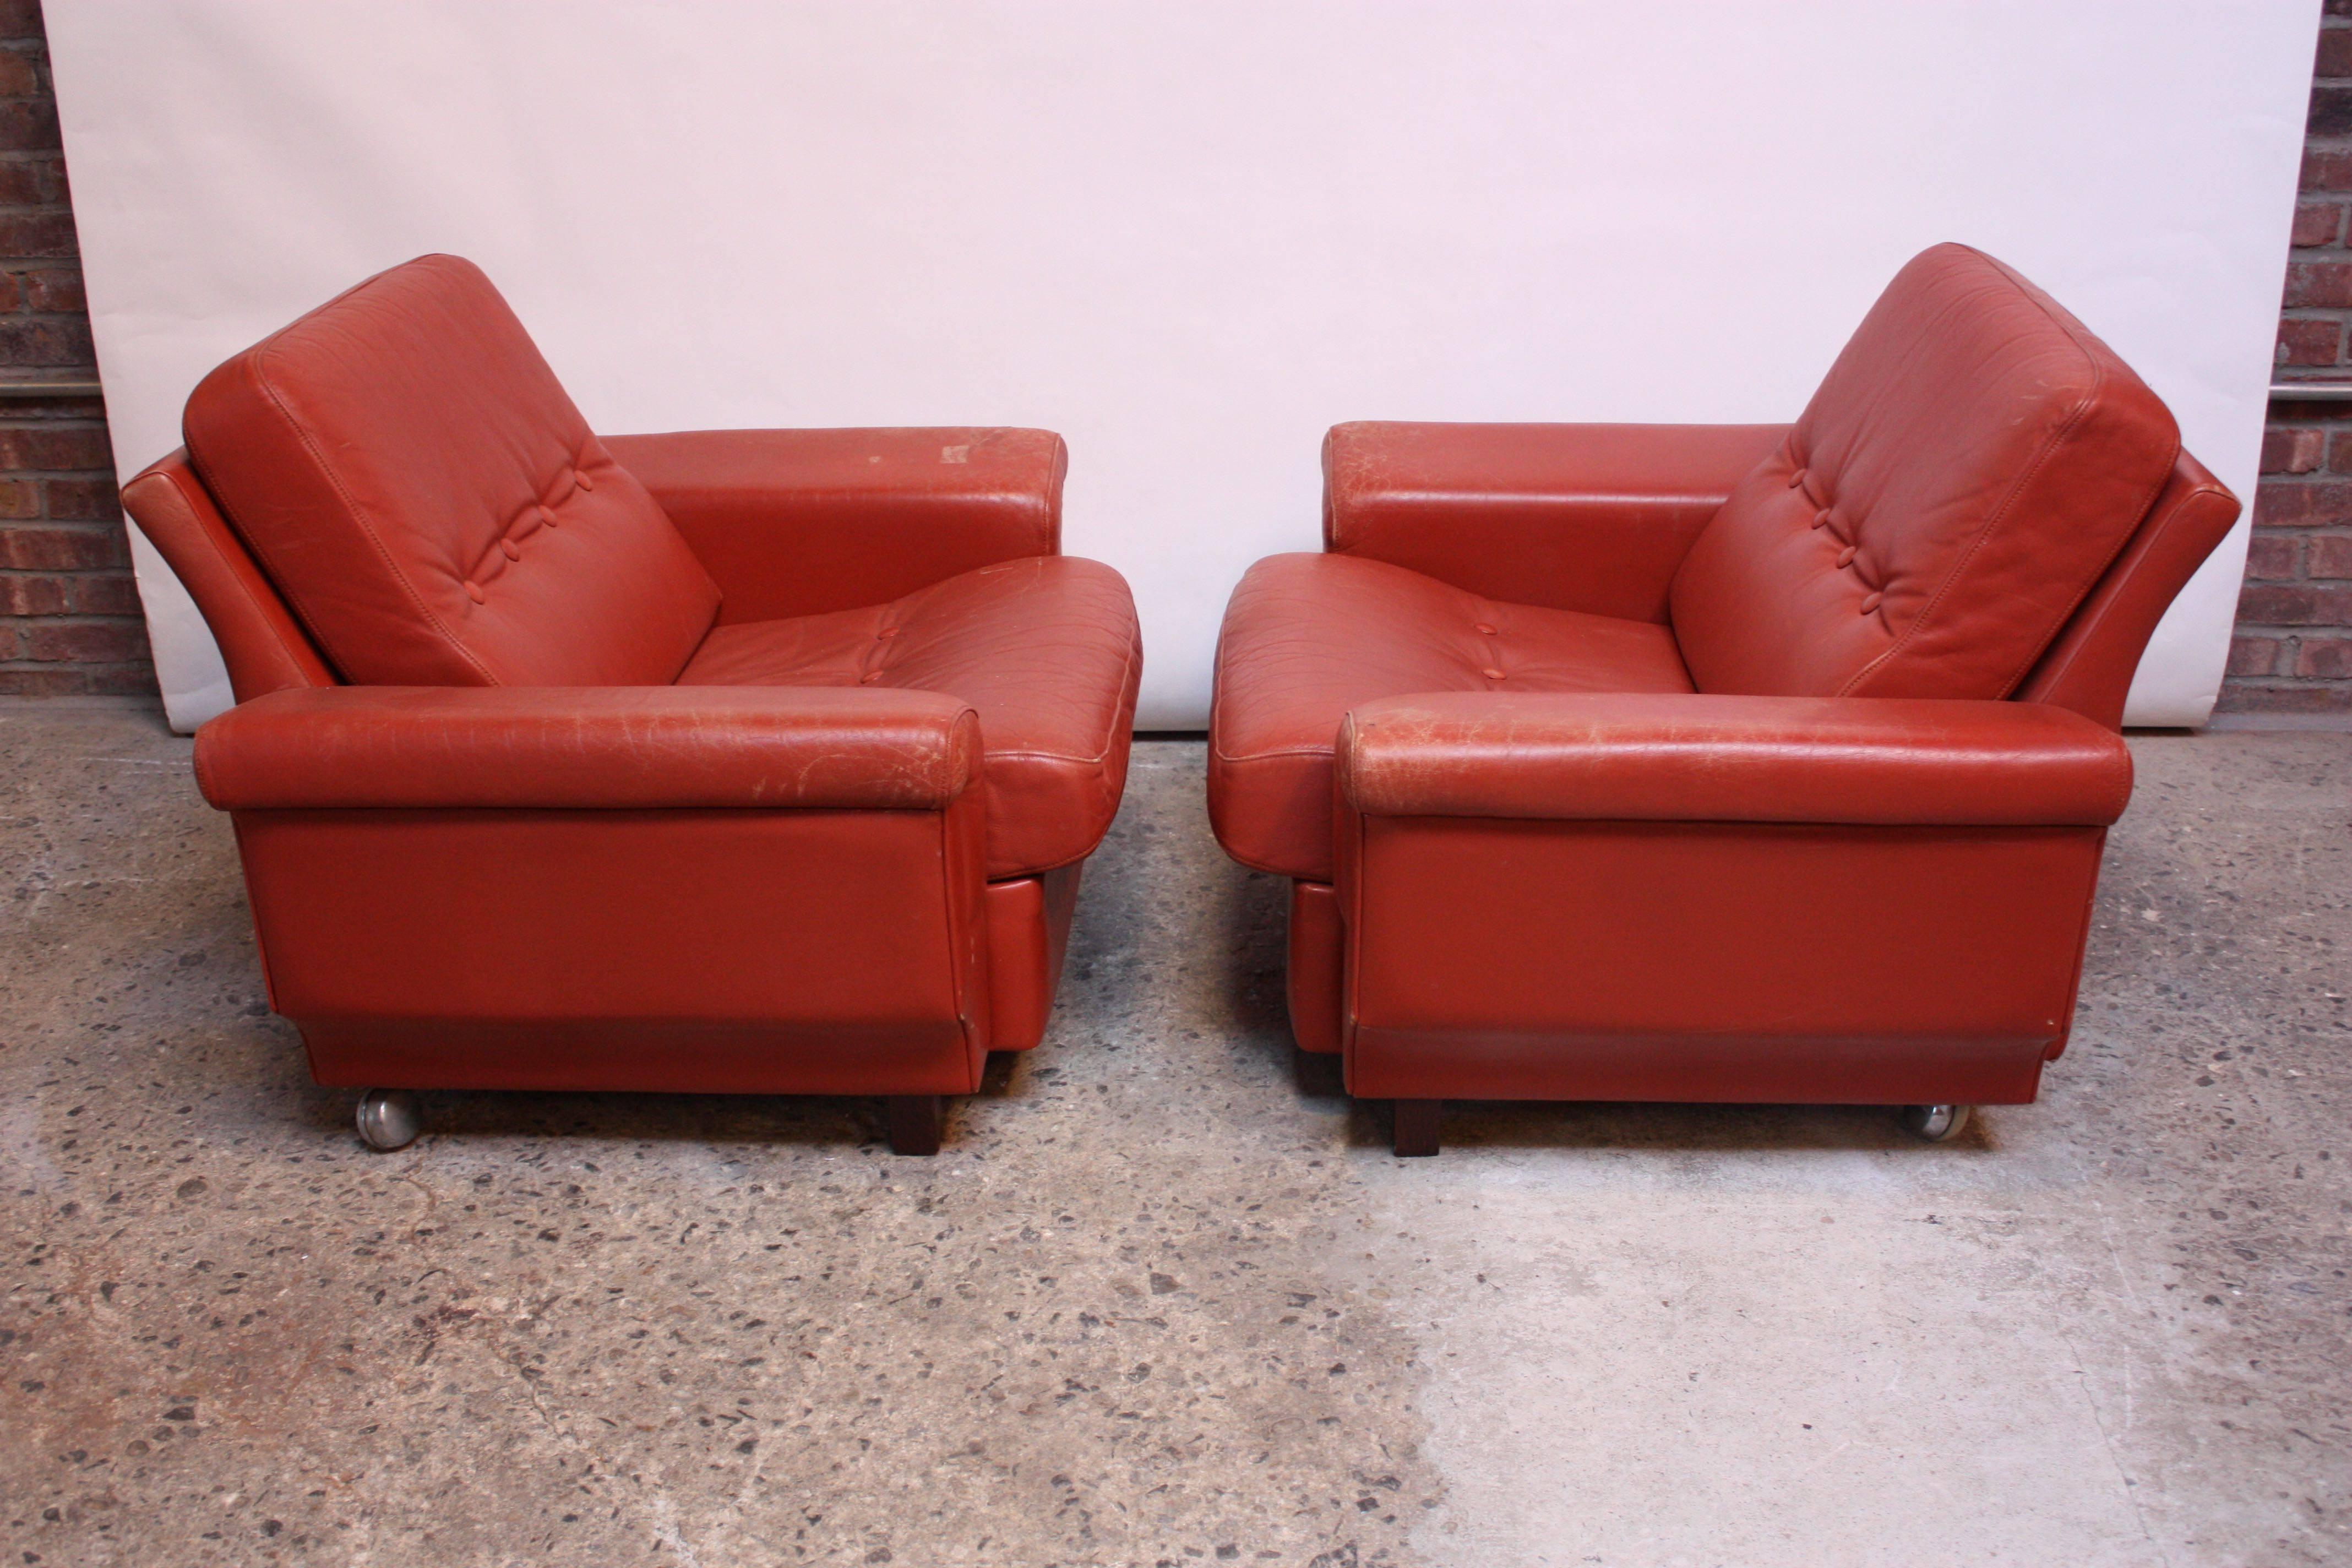 Stained Pair of Danish Modern Lounge Chairs in Coral Leather